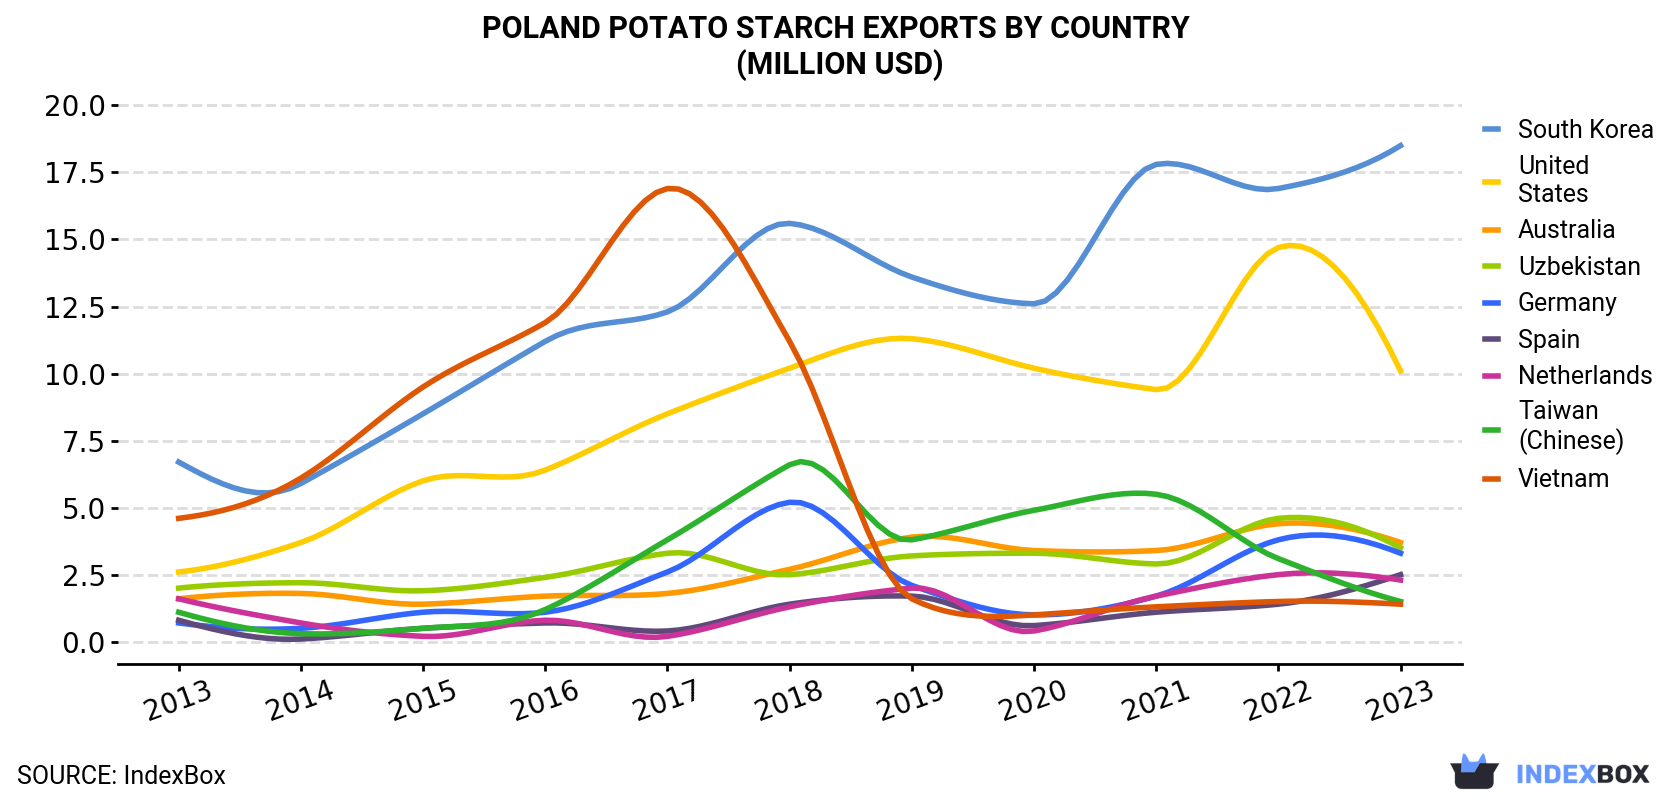 Poland Potato Starch Exports By Country (Million USD)